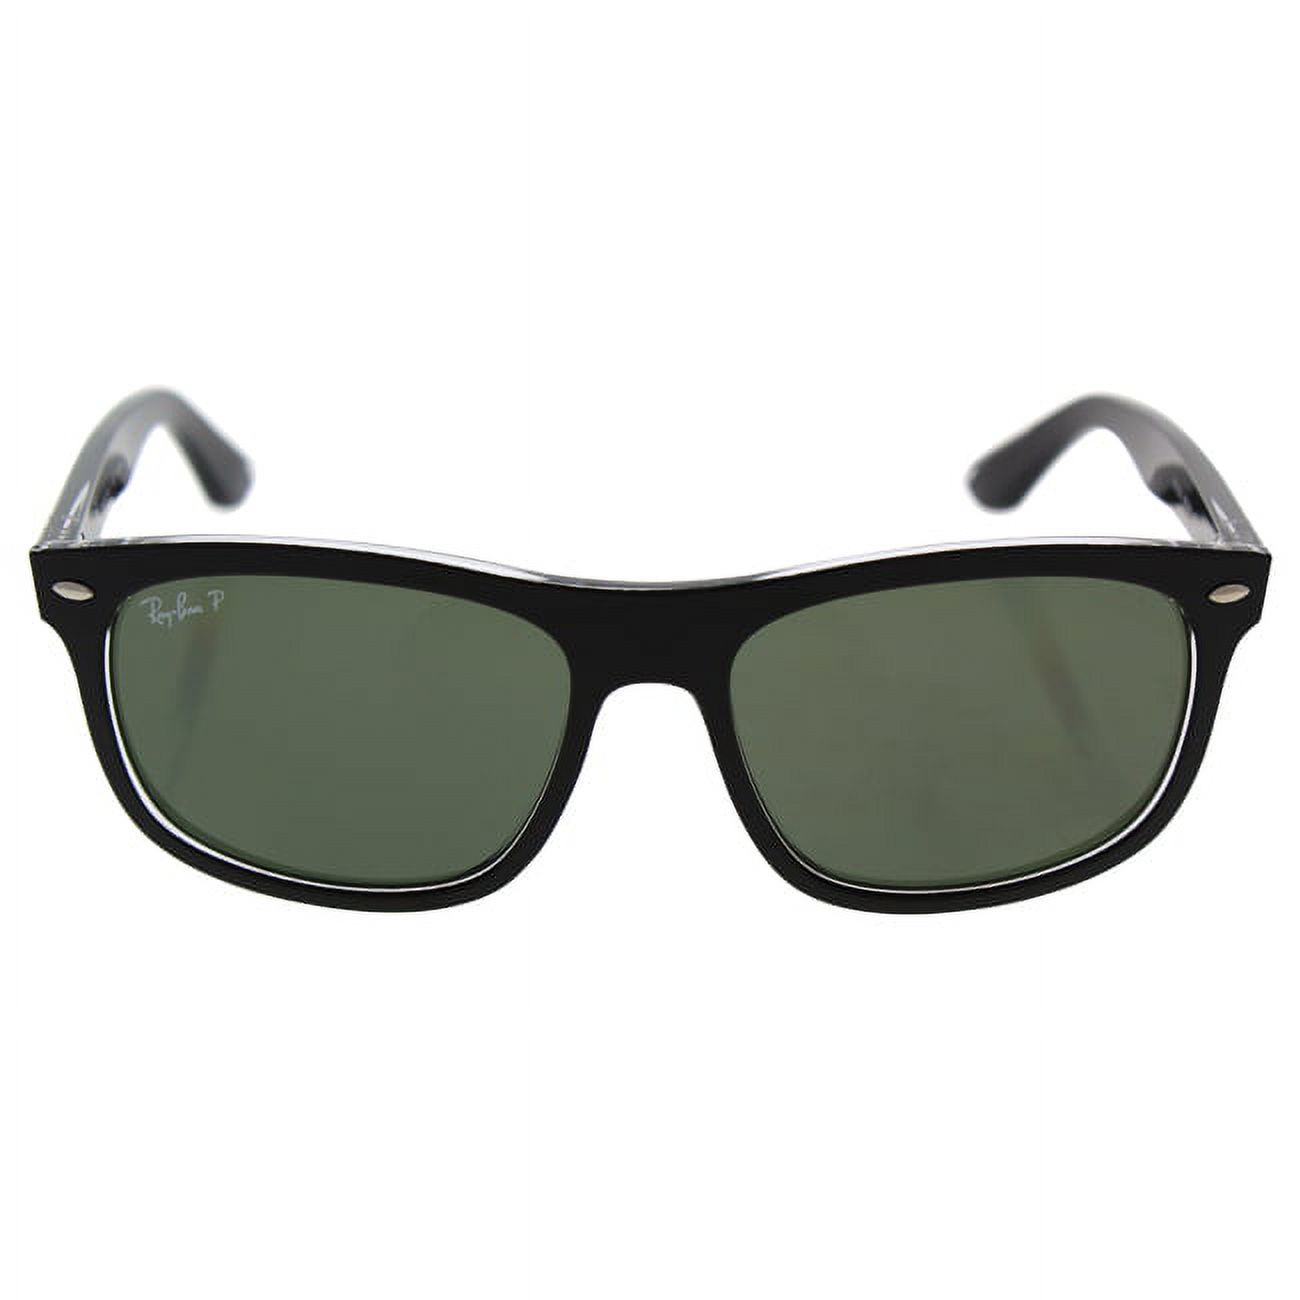 Ray Ban RB 4222 6052/9A - Black/Green Classic Polarized by Ray Ban for Men - 56-16-145 mm Sunglasses - image 1 of 3